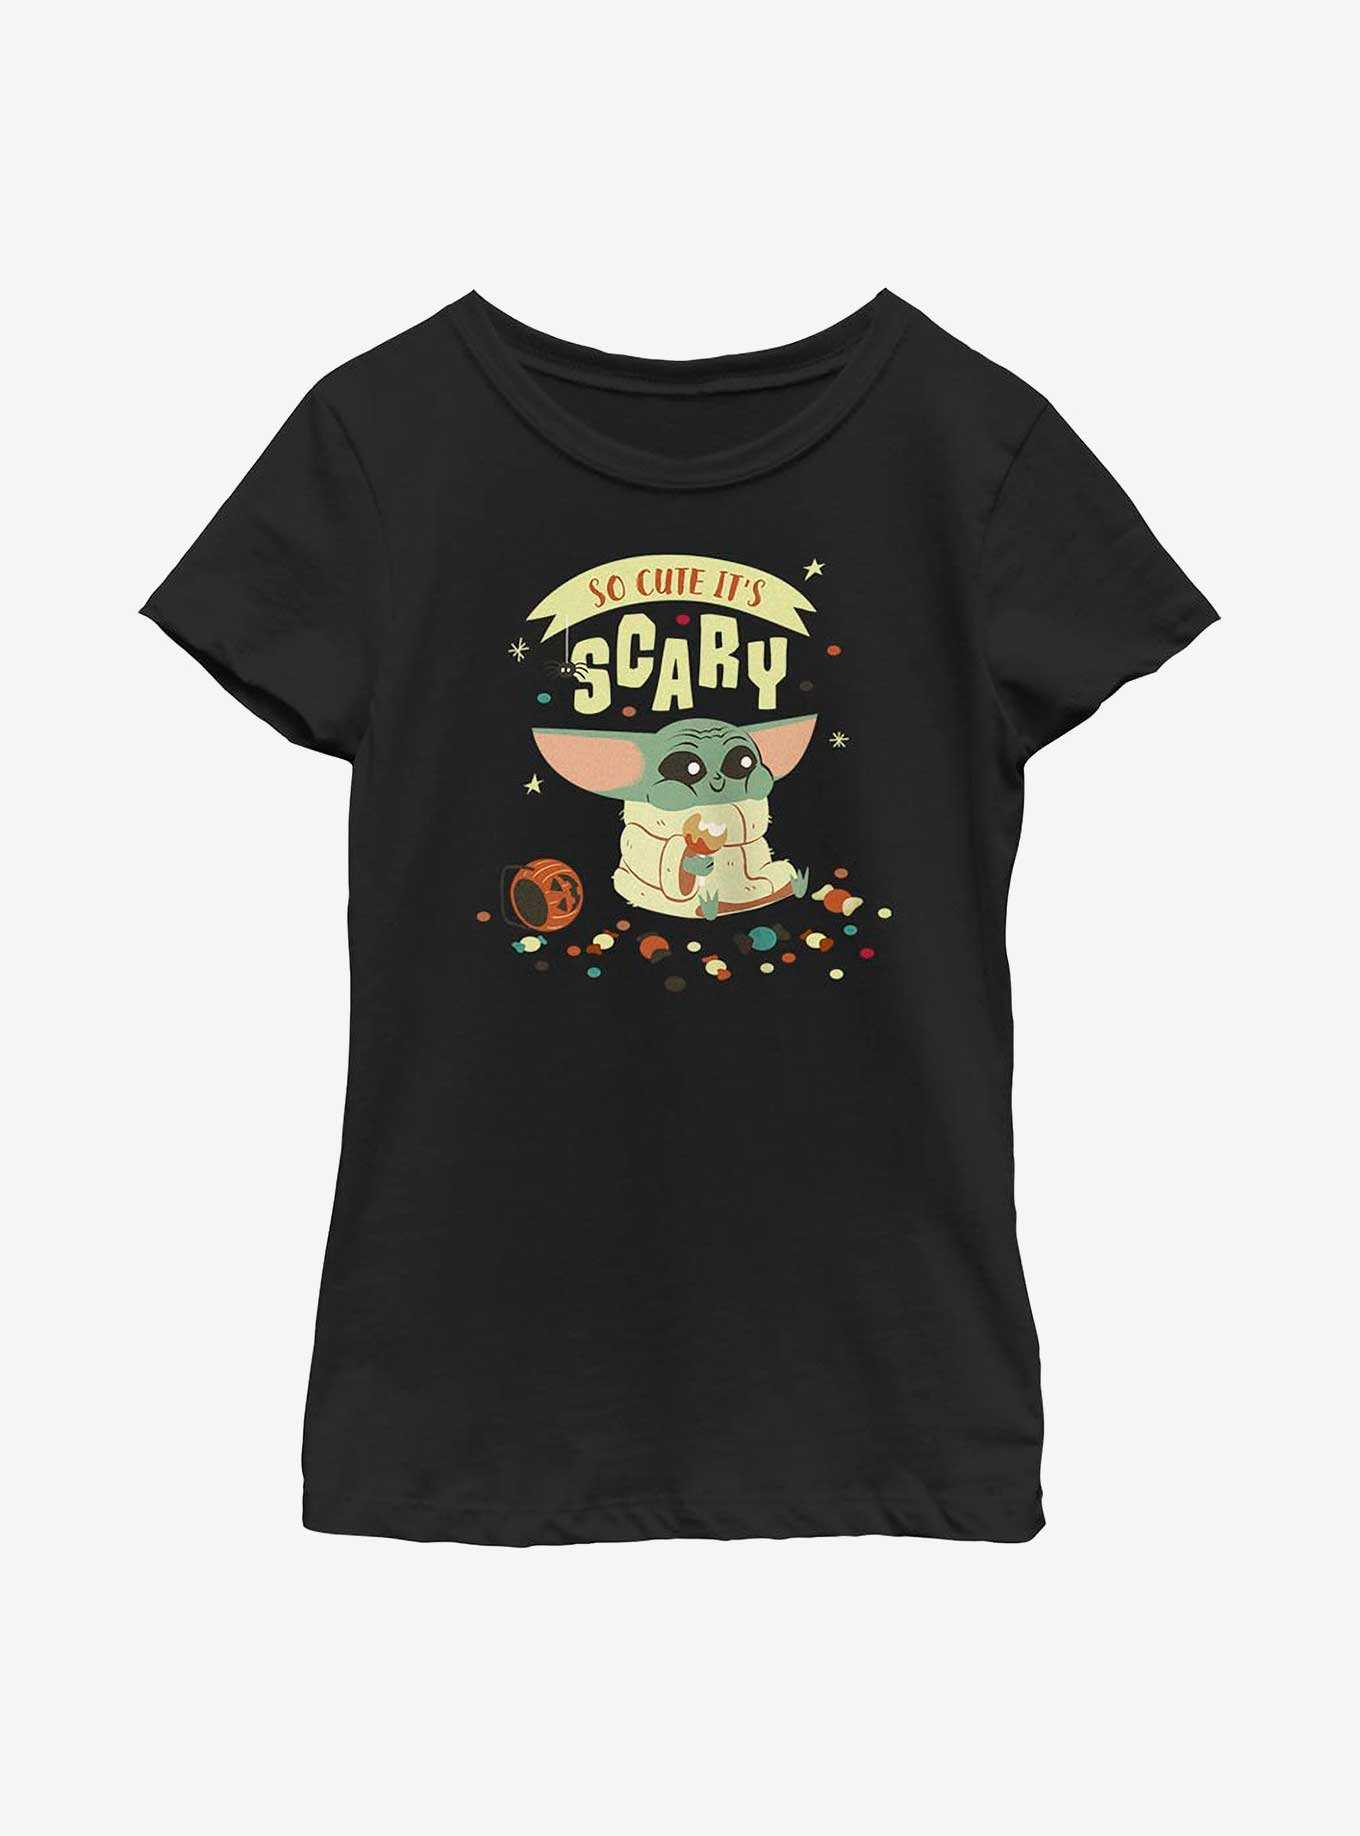 Star Wars The Mandalorian So Cute It's Scary Youth Girls T-Shirt, , hi-res